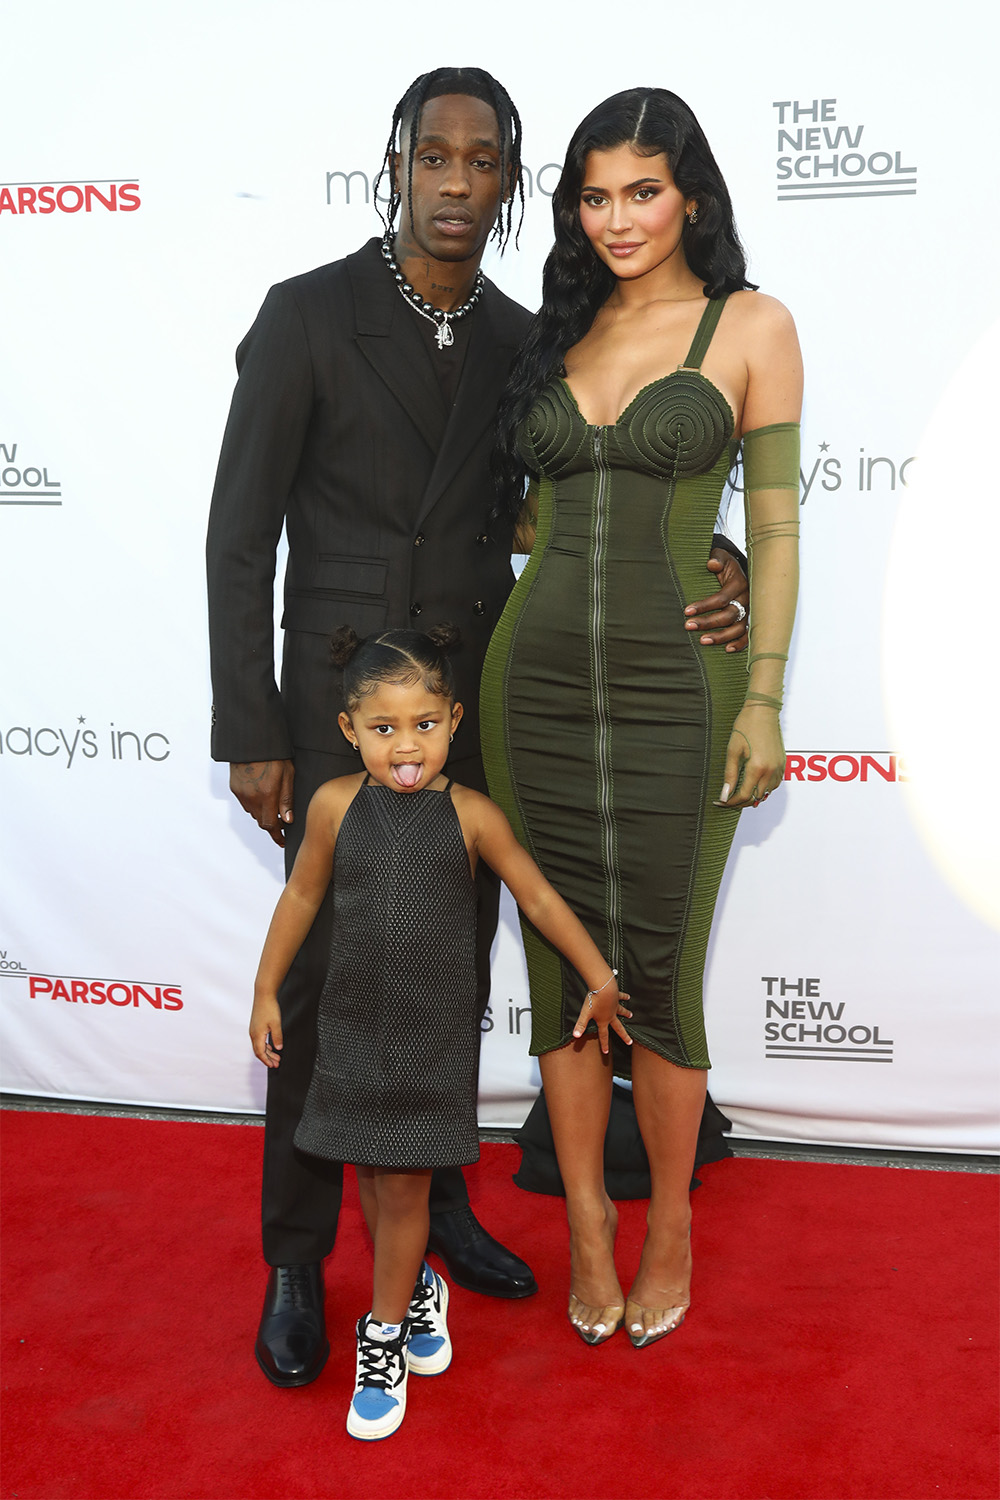 Kylie Jenner and Travis Scott Legally Change Their Son's Name to Aire